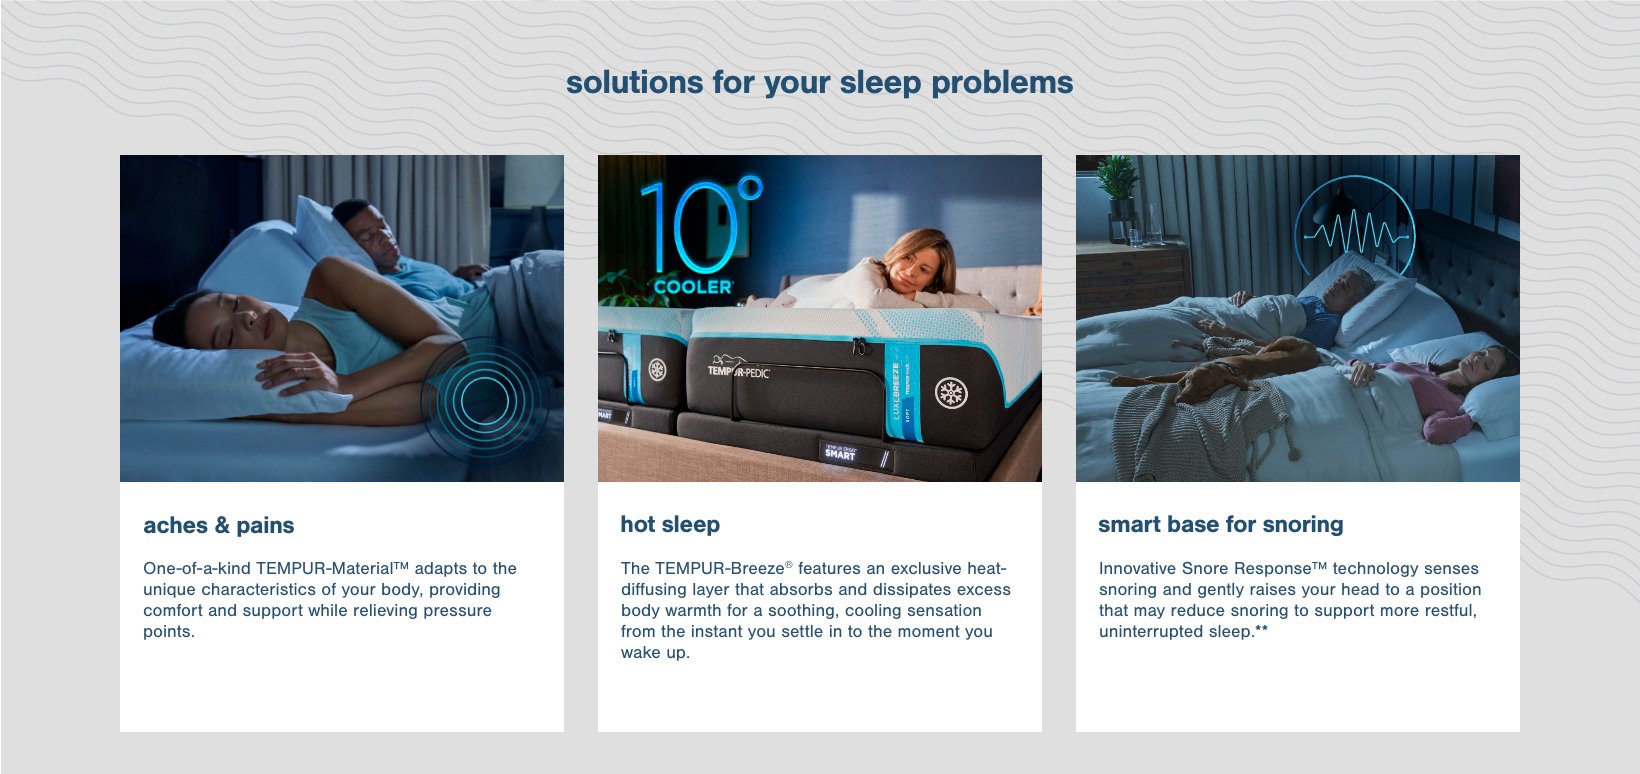 Tempur-Pedic Mattresses solutions for your sleep problems